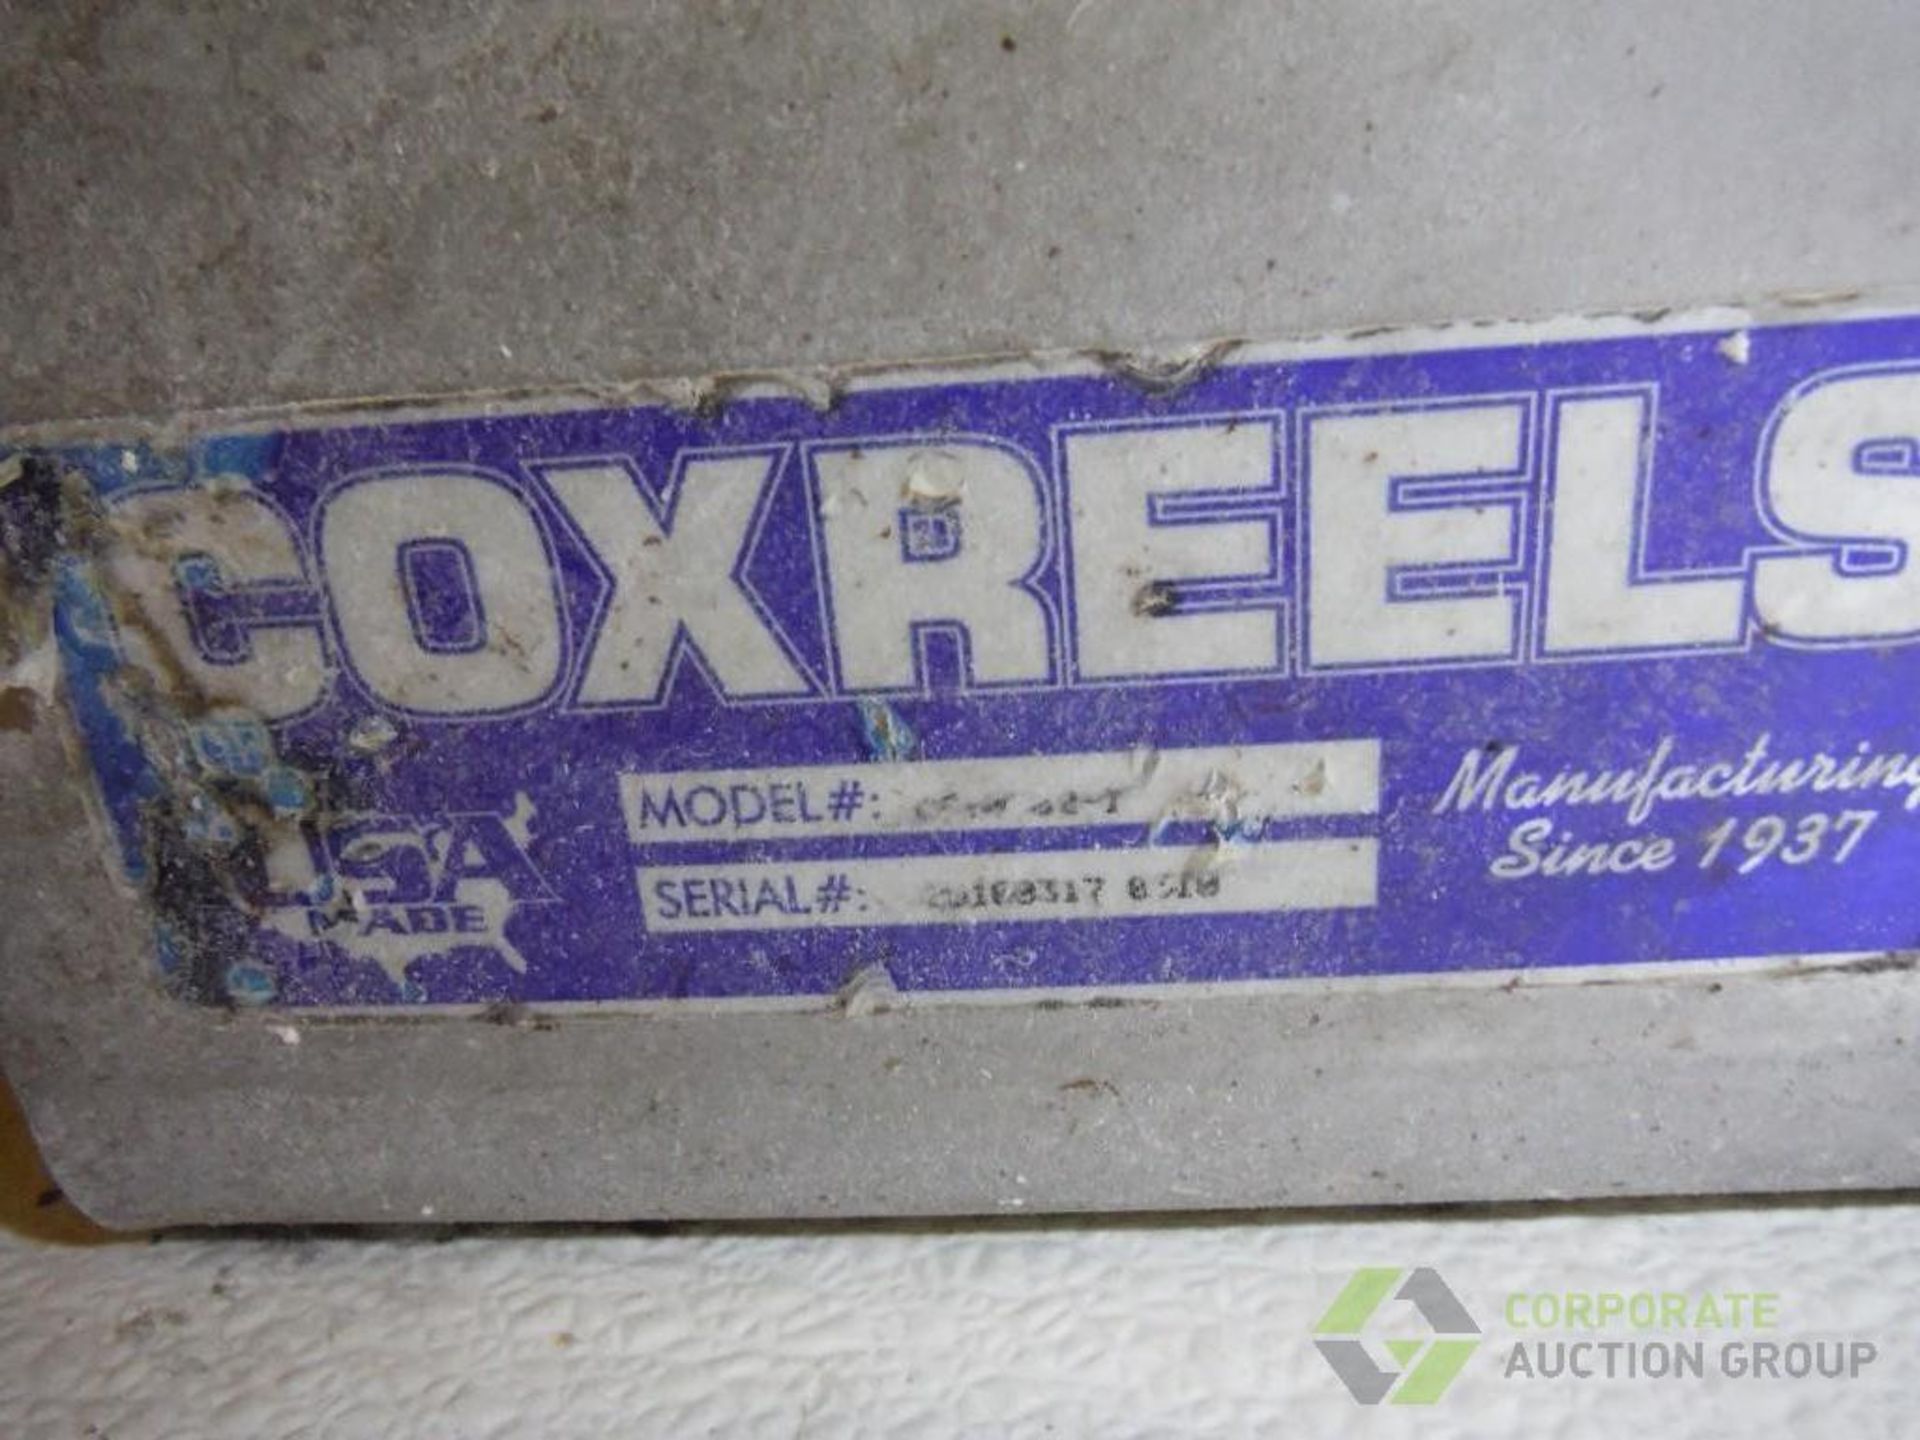 Coxreel SS hose reel with water hose, 20 in. dia. - Image 3 of 3